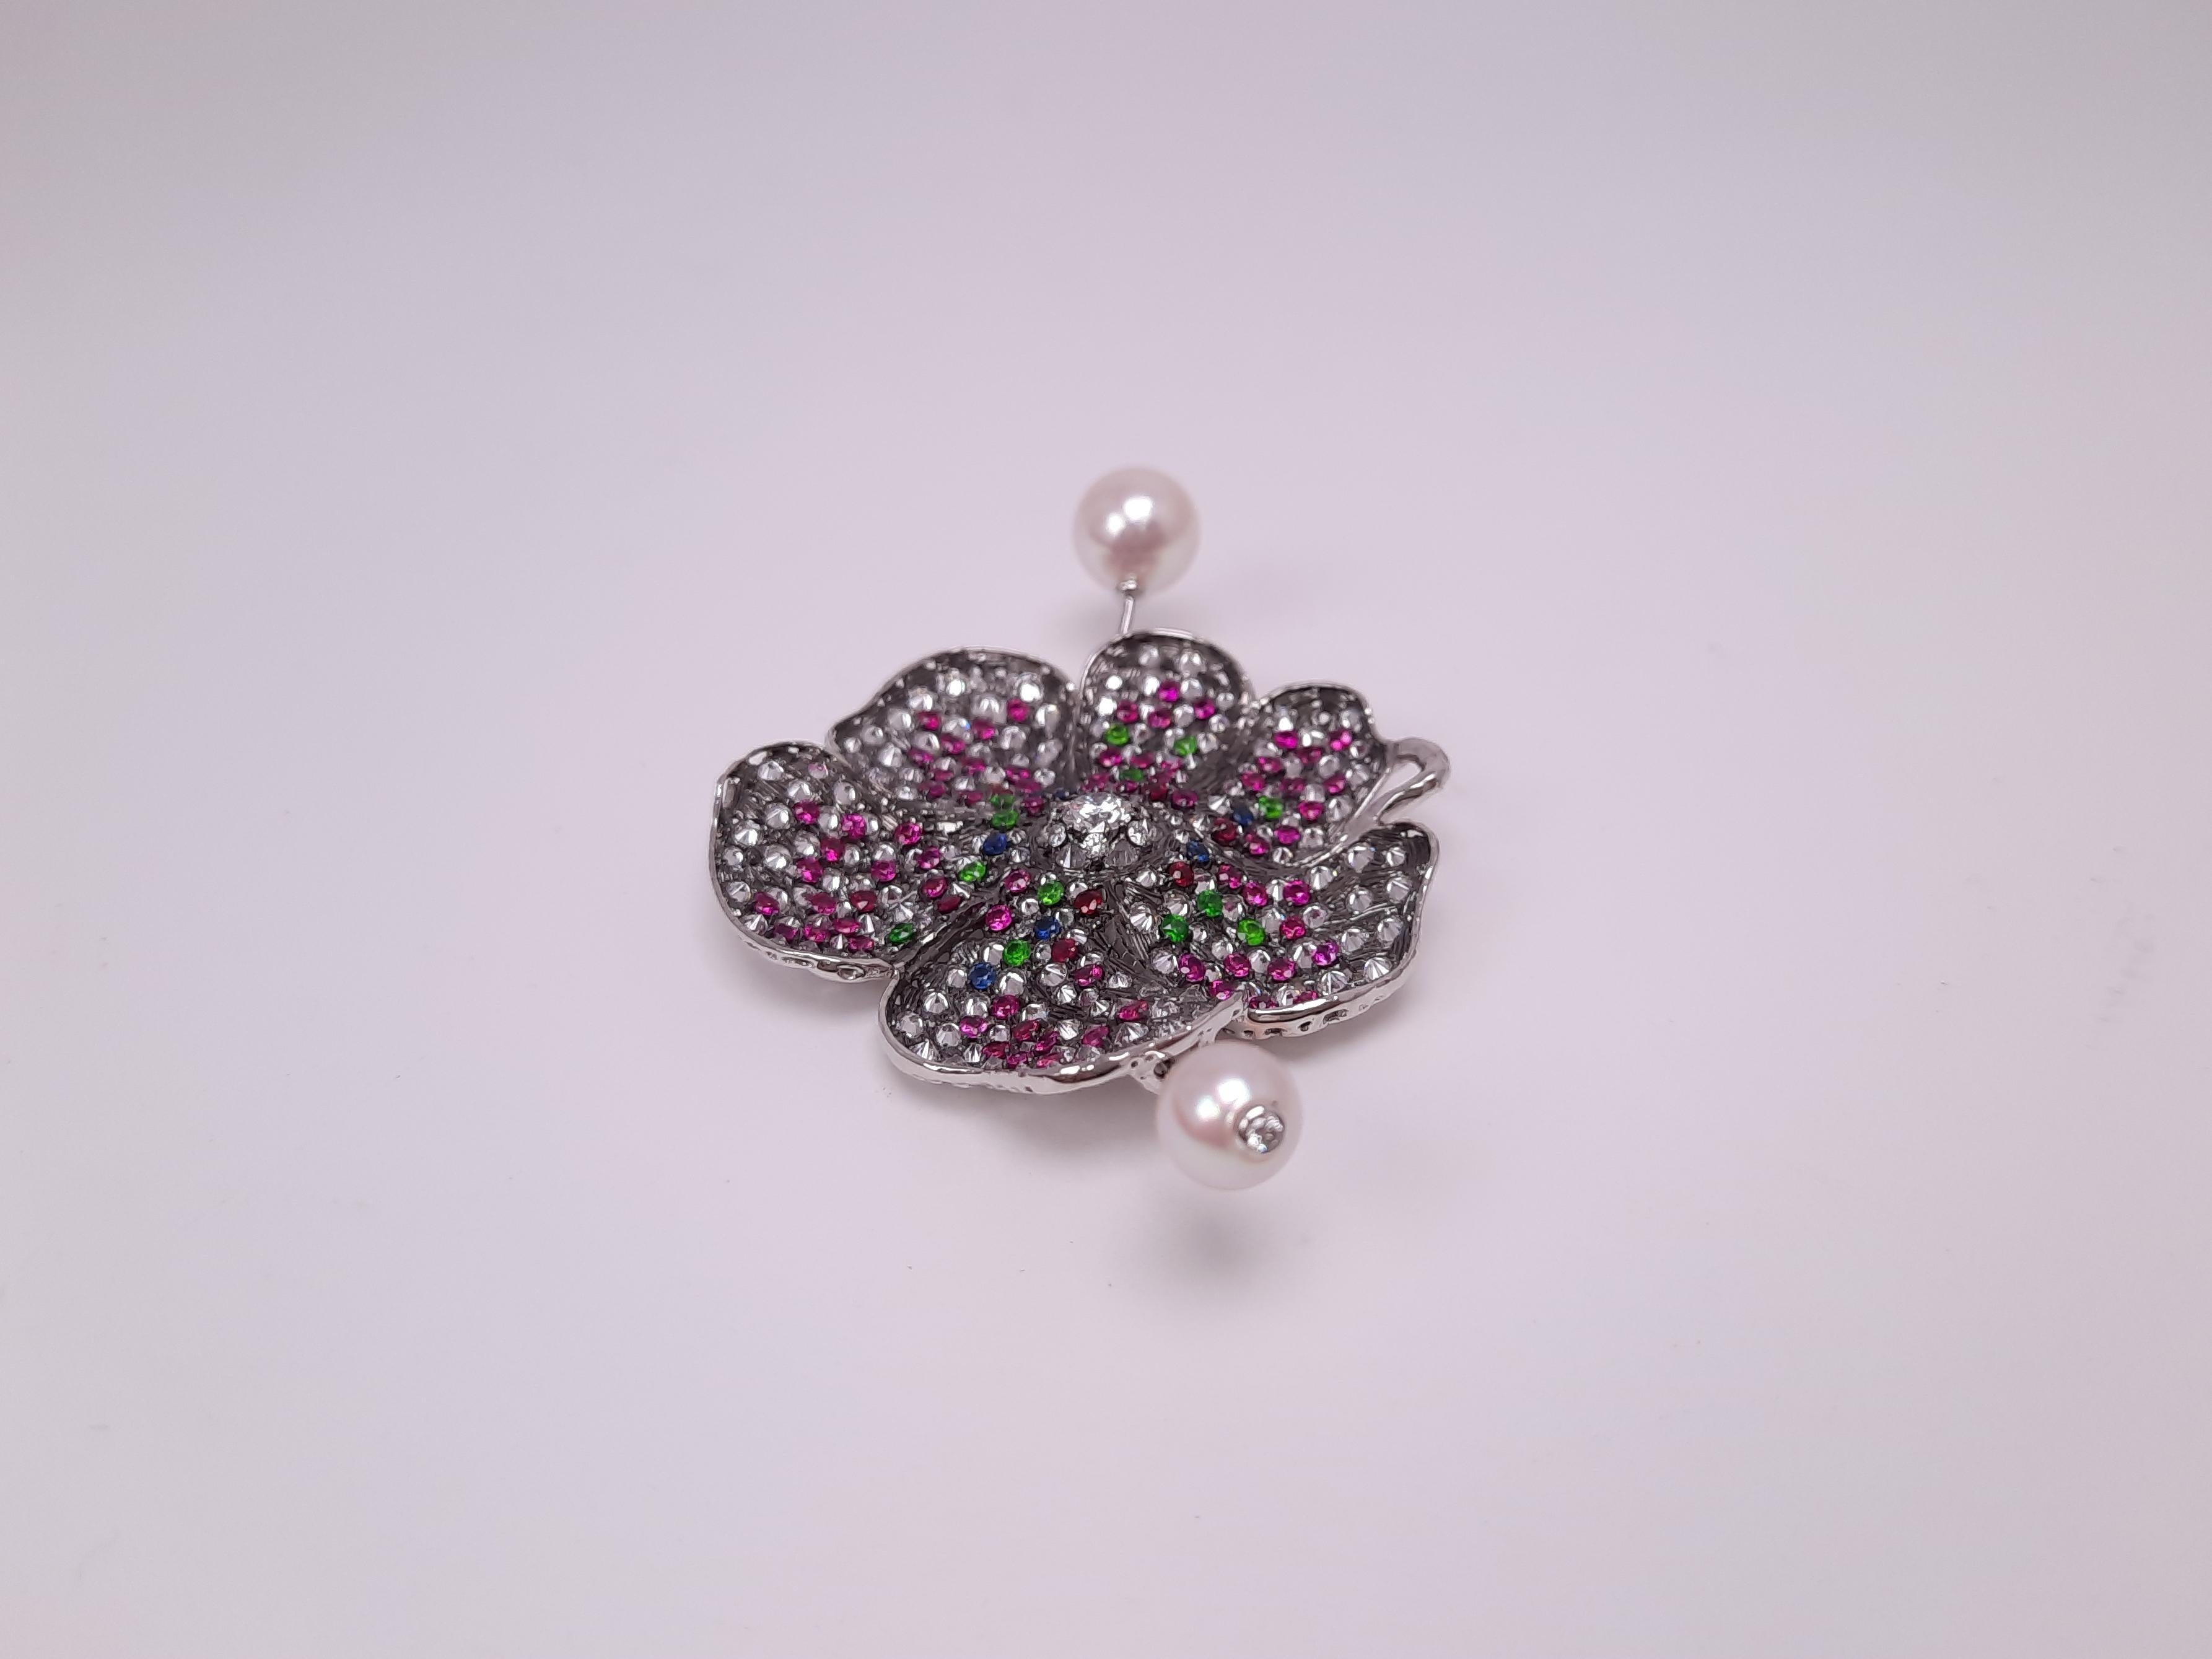 Over 4 ct diamonds, radiant demantoid garnet, precious rubies and sapphires made a great harmony on a handmade poppy flower. Setting stones upside down alternatively, the broach gives unusual luminescence. Handmade flower petal is so lively. The